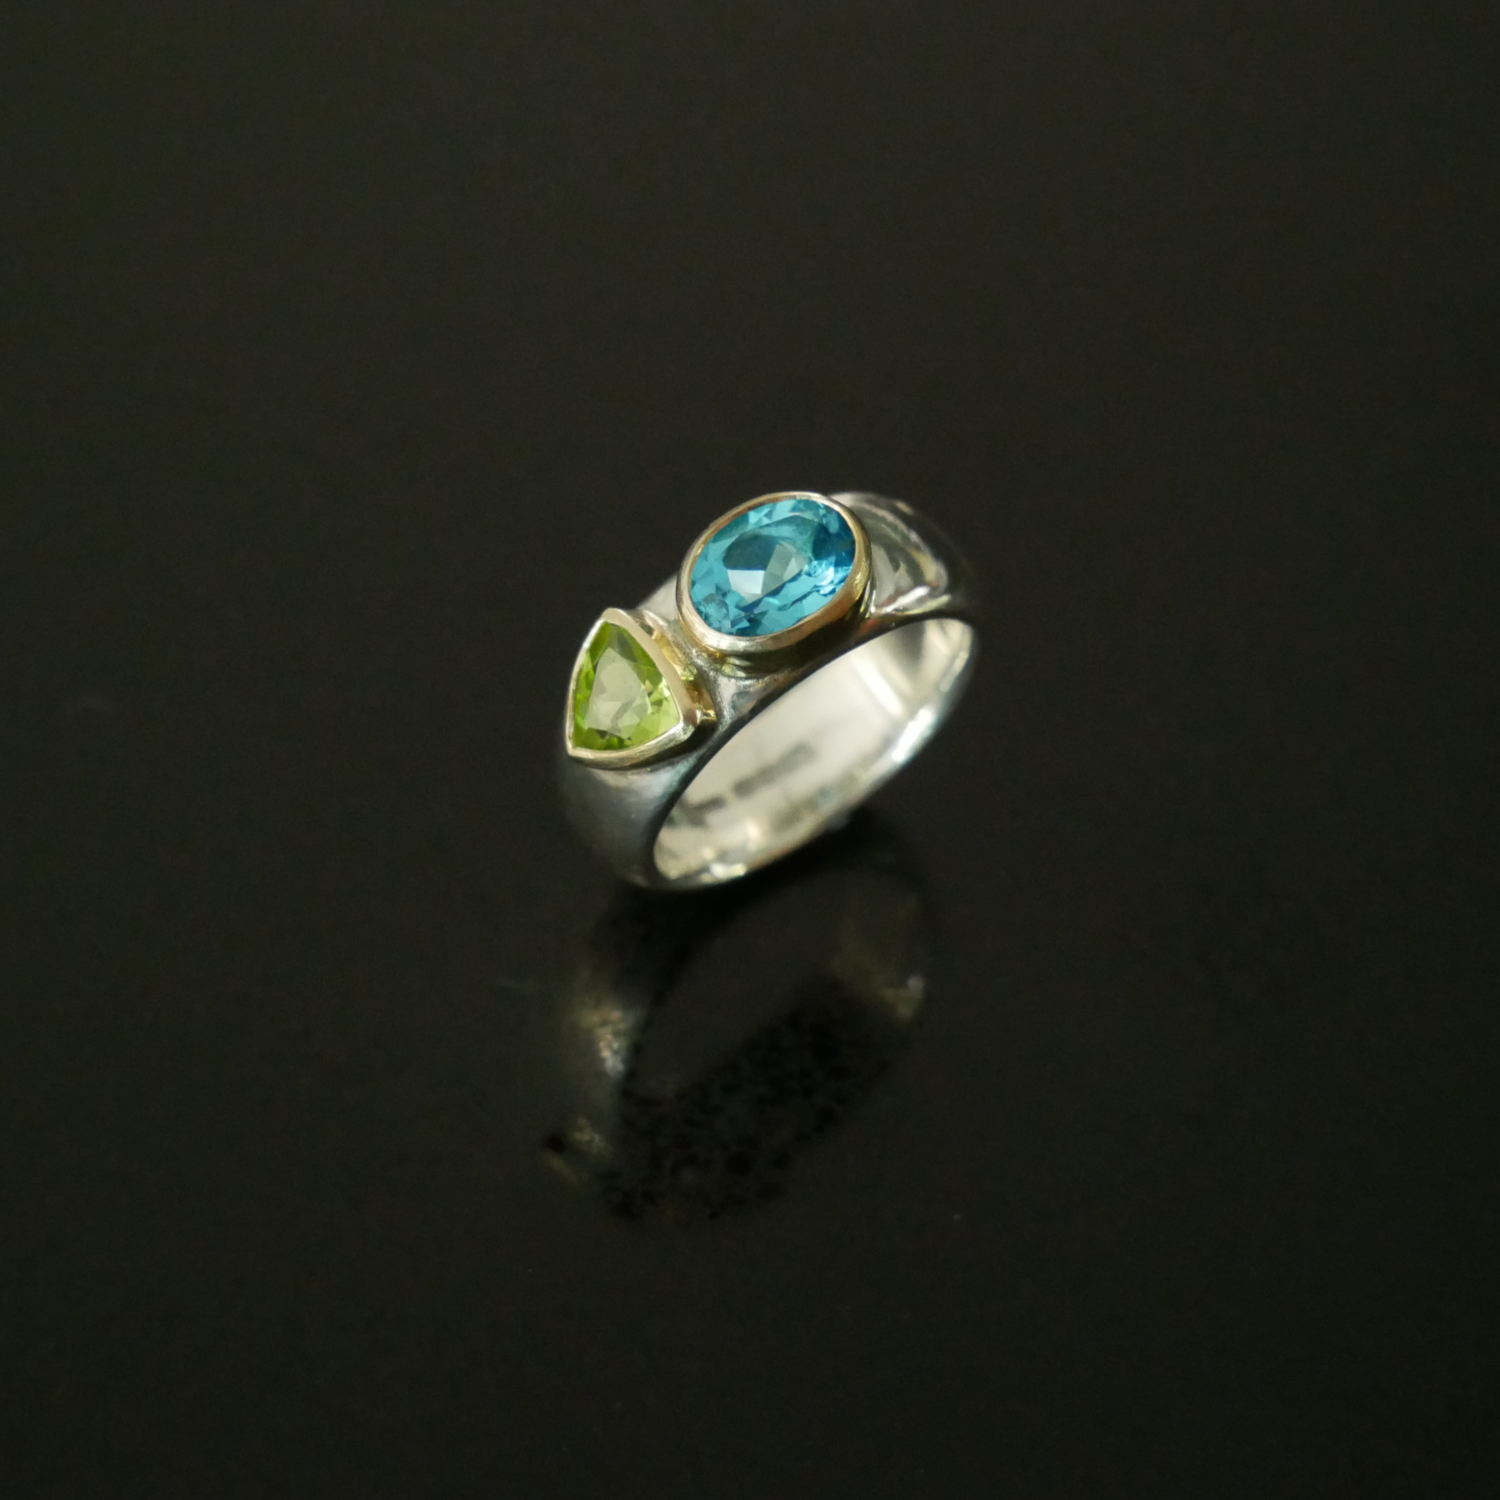 Silver and gold wide ring with topaz and peridot